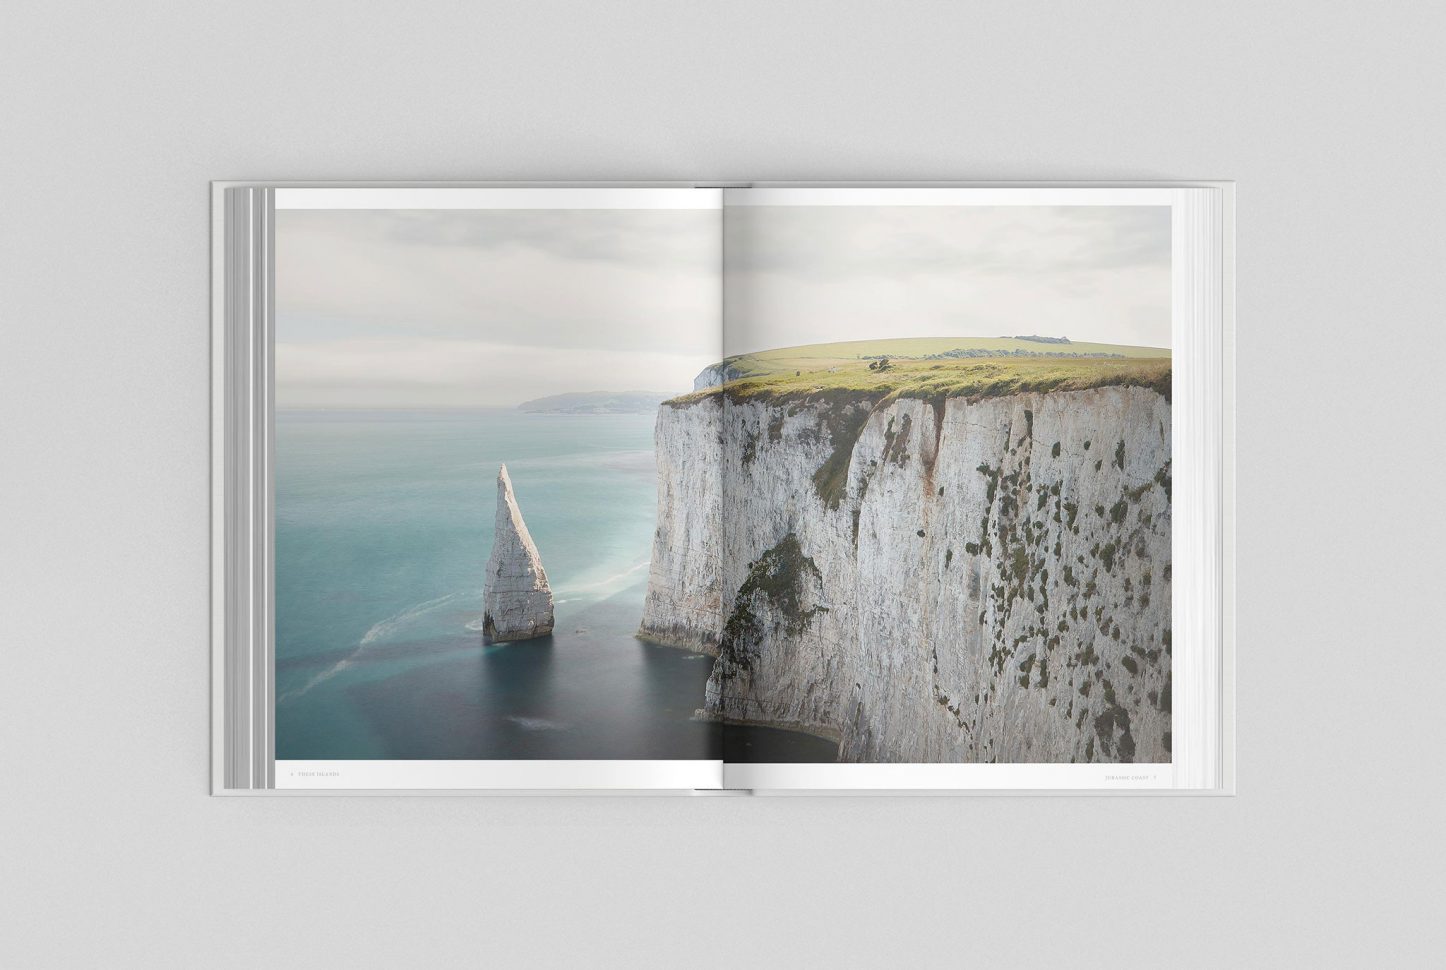 These Islands - A Portrait of the British Isles